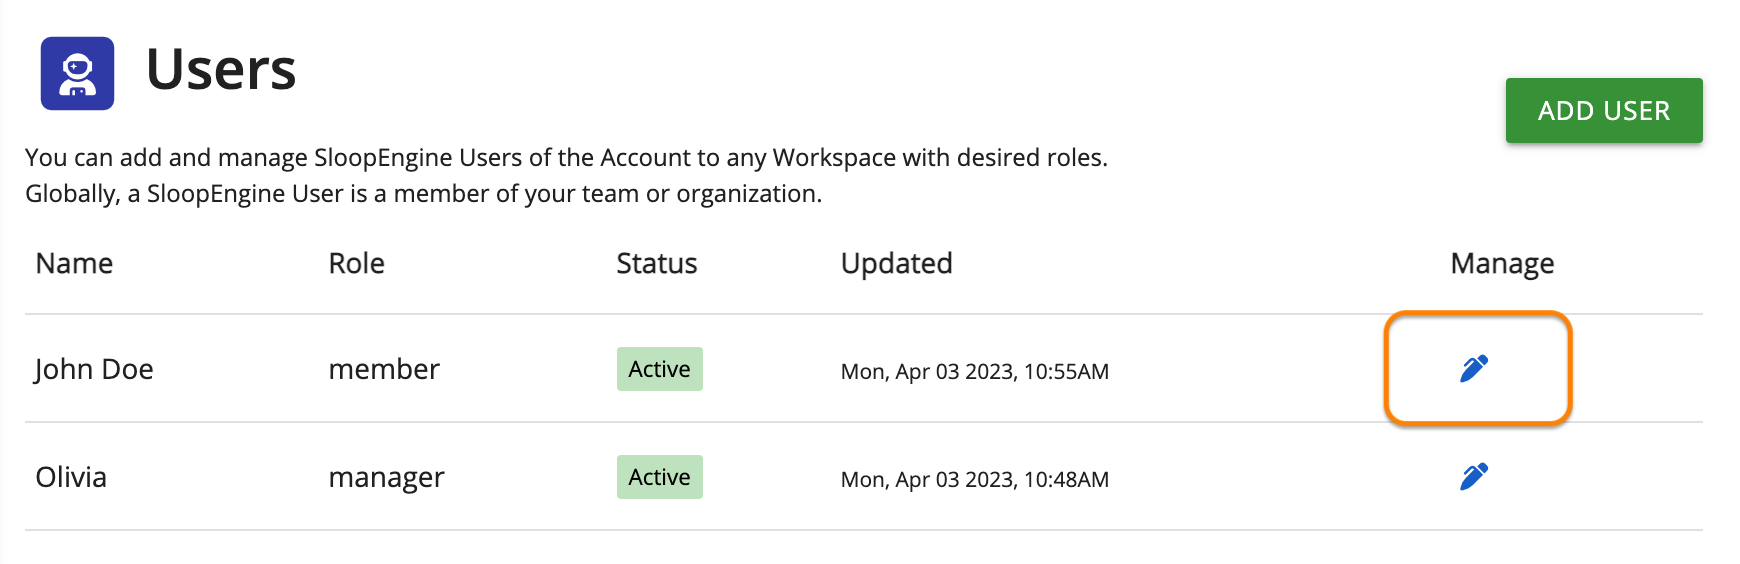 Highlighted update button on the specific workspace user.